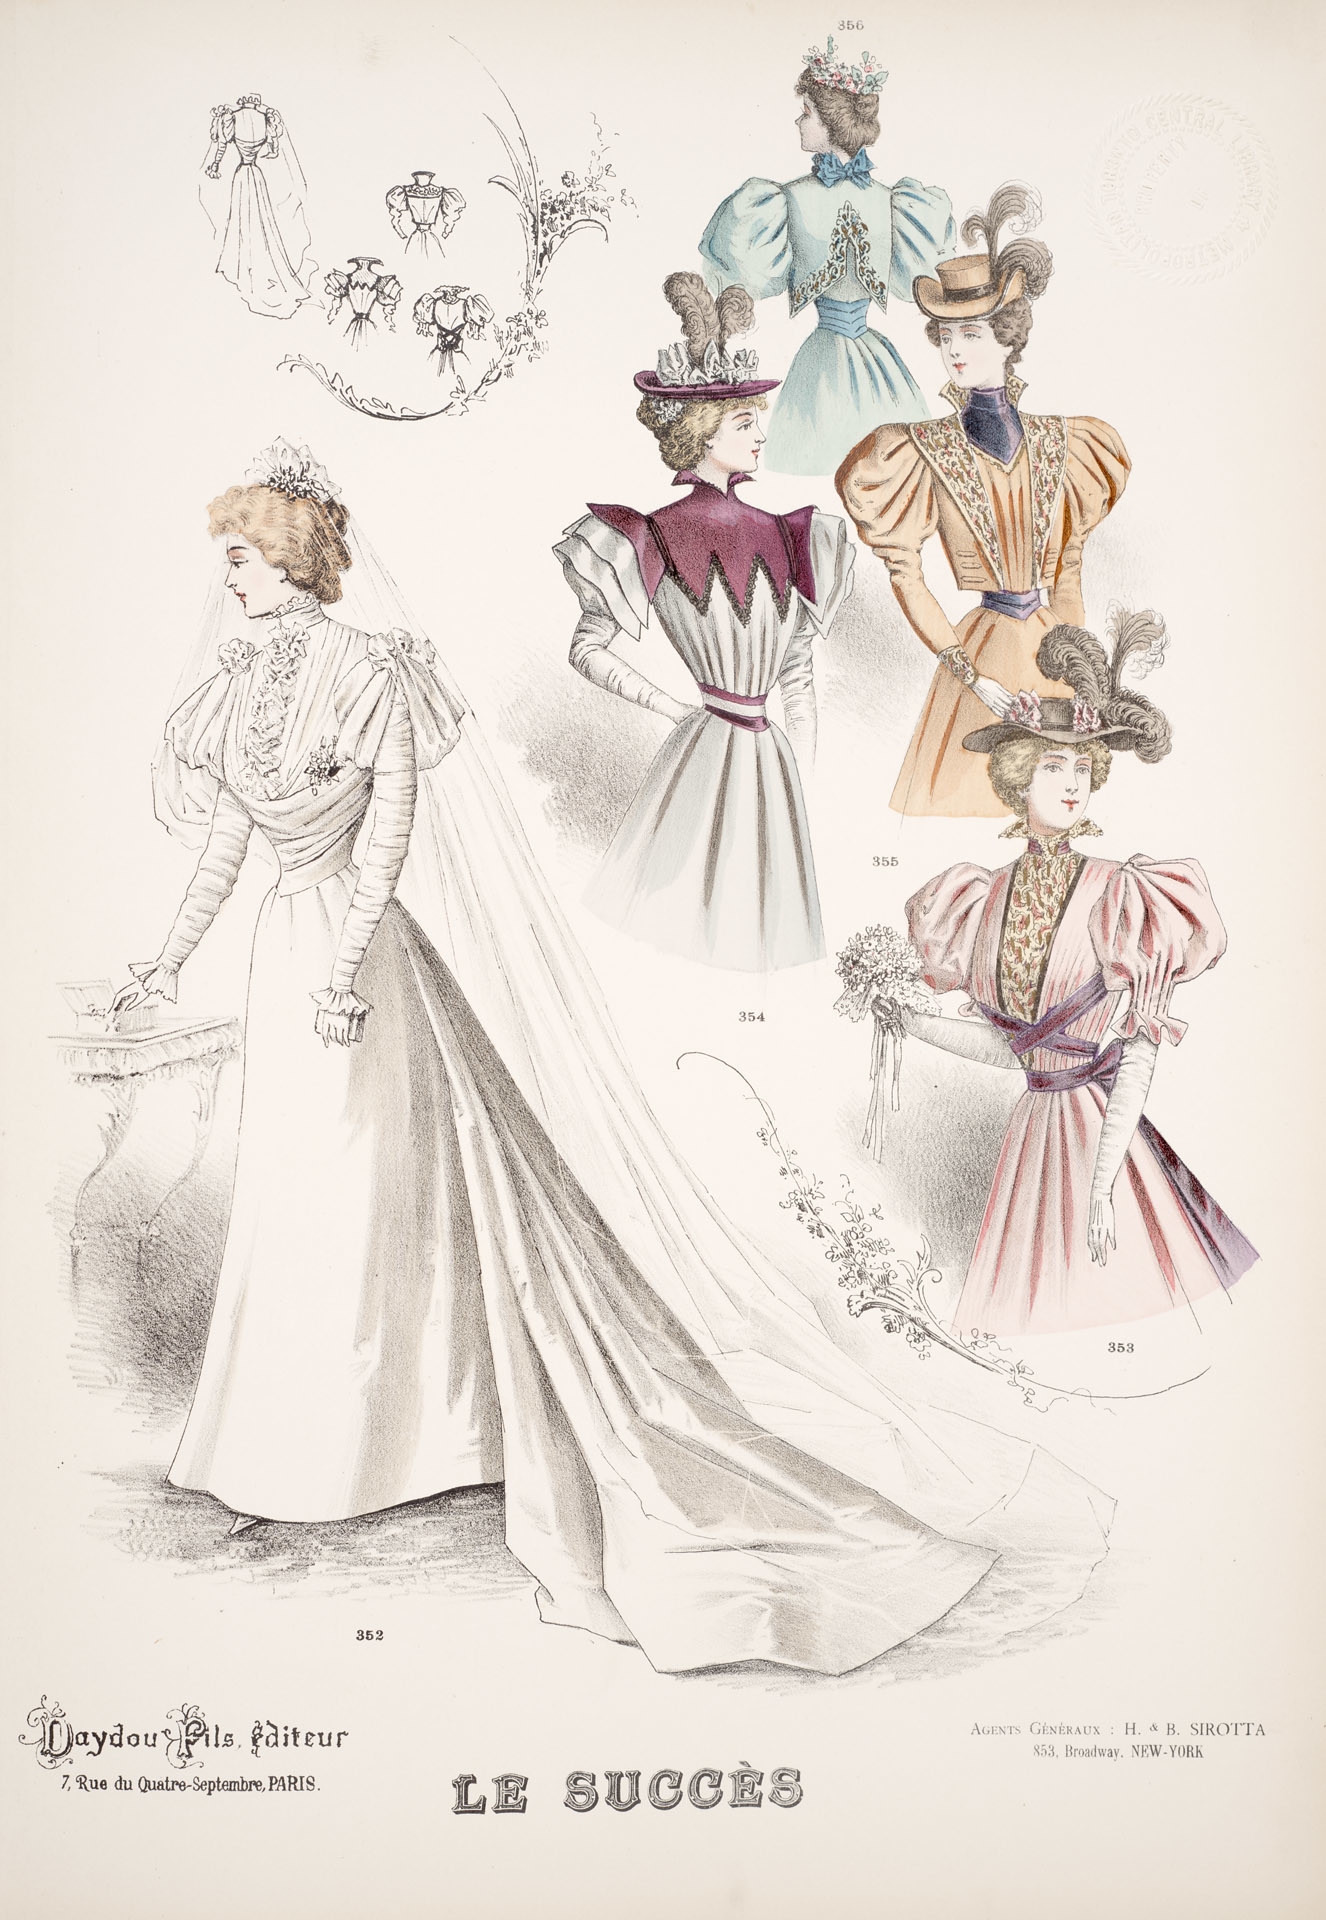 Daydou Fils, Paris. A Collection of Fashion Plates of the Late 1890s. ca 1890